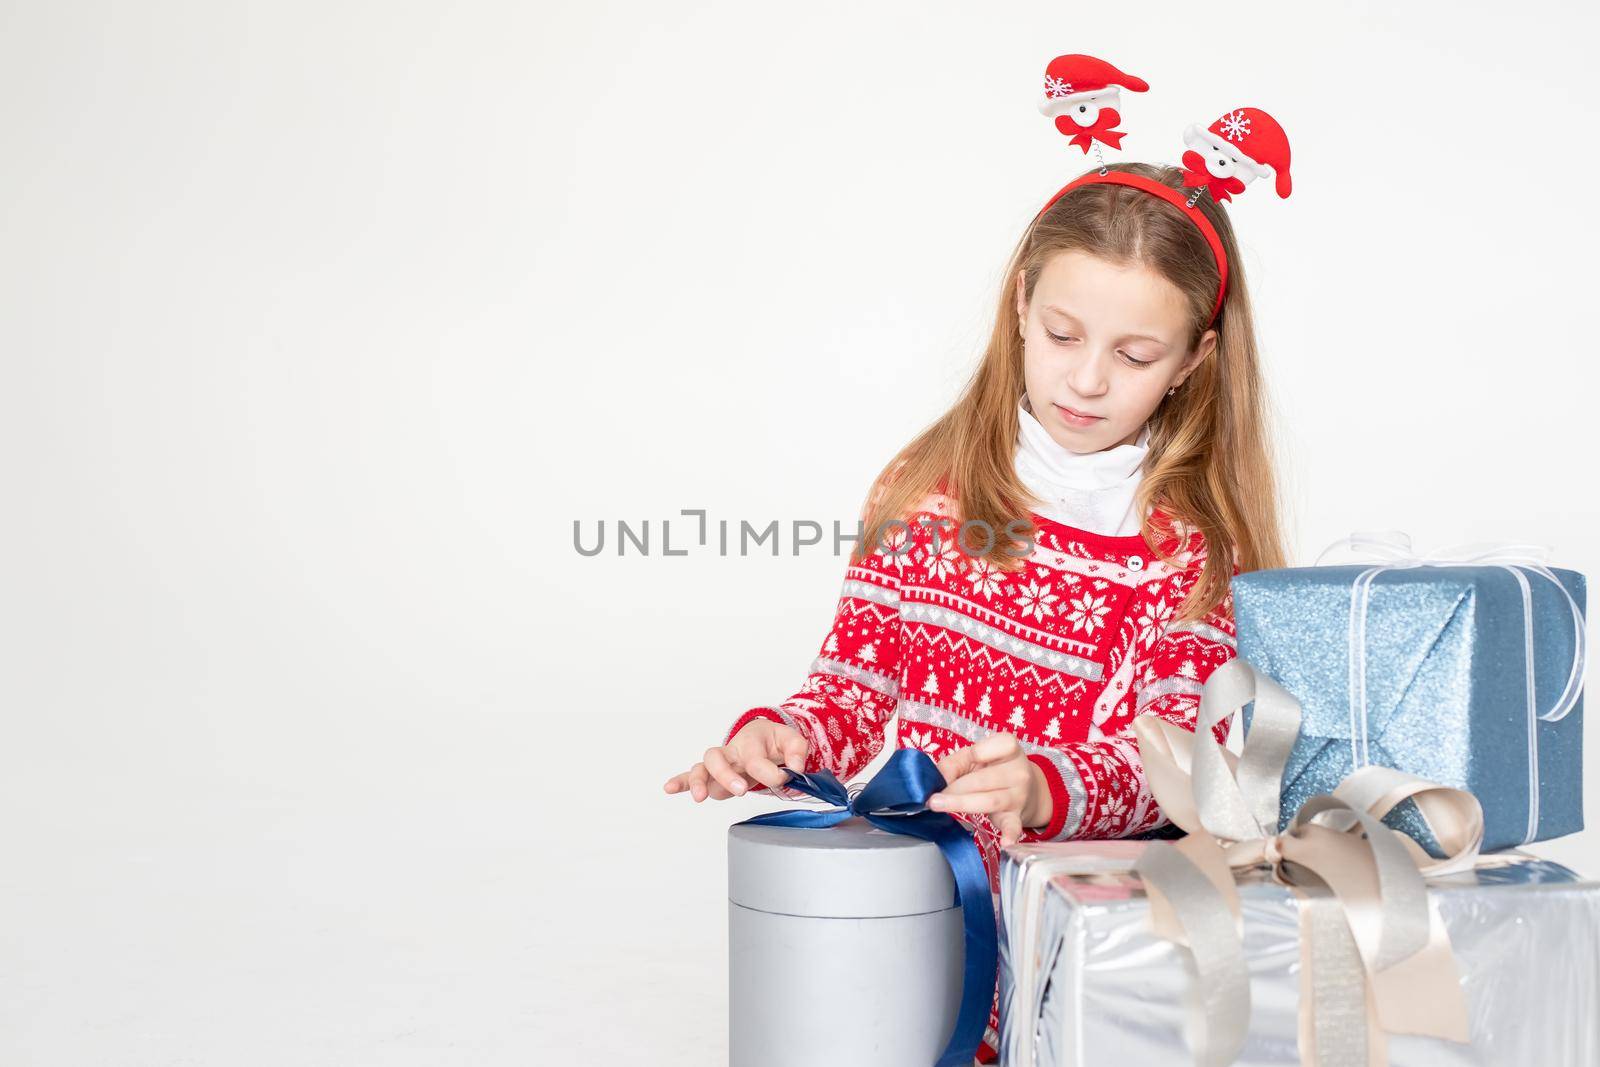 Pretty little girl wearing Christmas headband sitting isolated on white background,holding stack of present boxes.Christmas, winter, happiness concept.Merry Christmas presents shopping sale.Copy space by YuliaYaspe1979